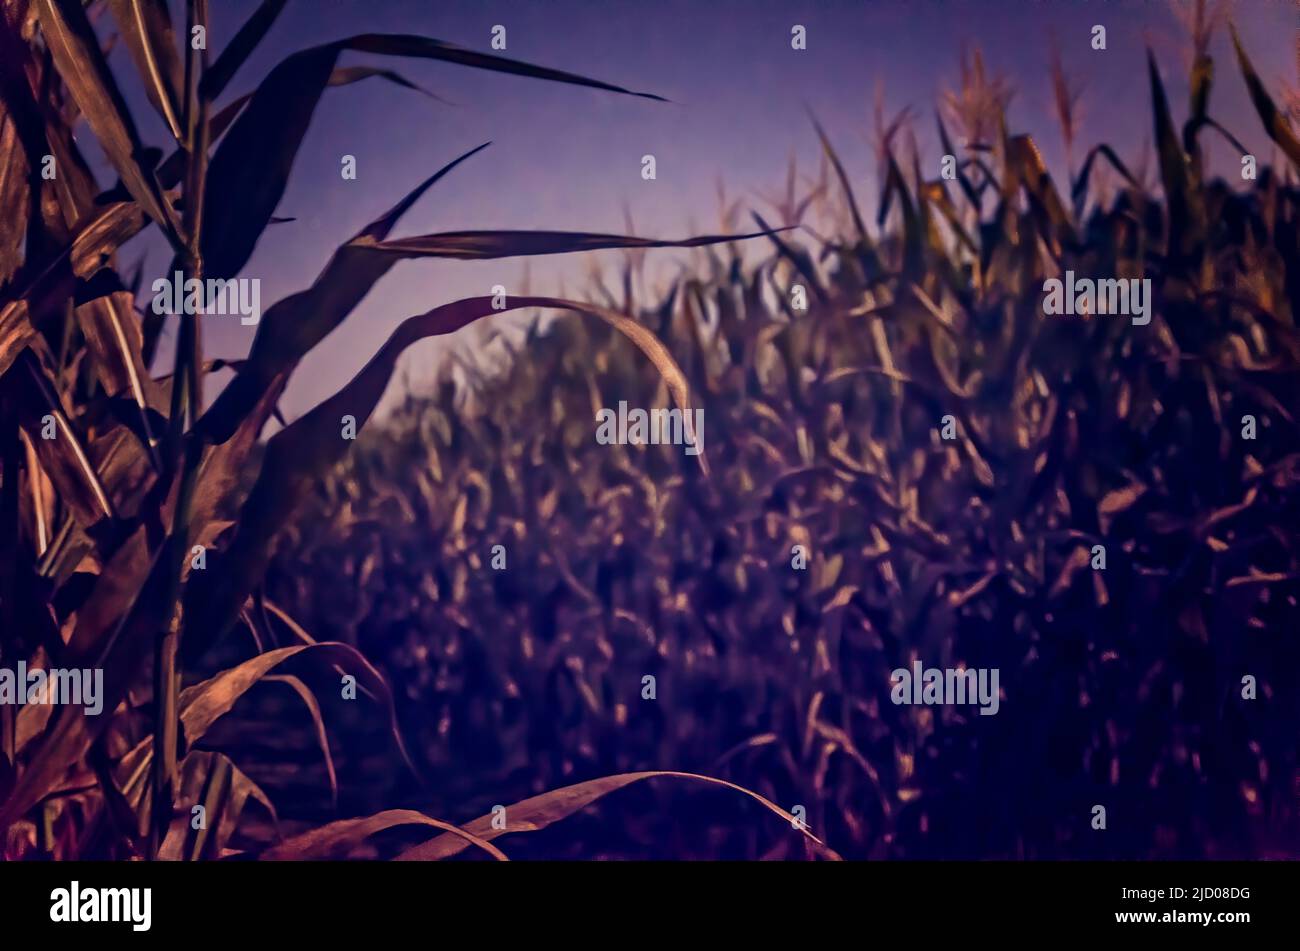 A corn field is pictured at night, Sept. 25, 2012, in Caledonia, Mississippi. Stock Photo